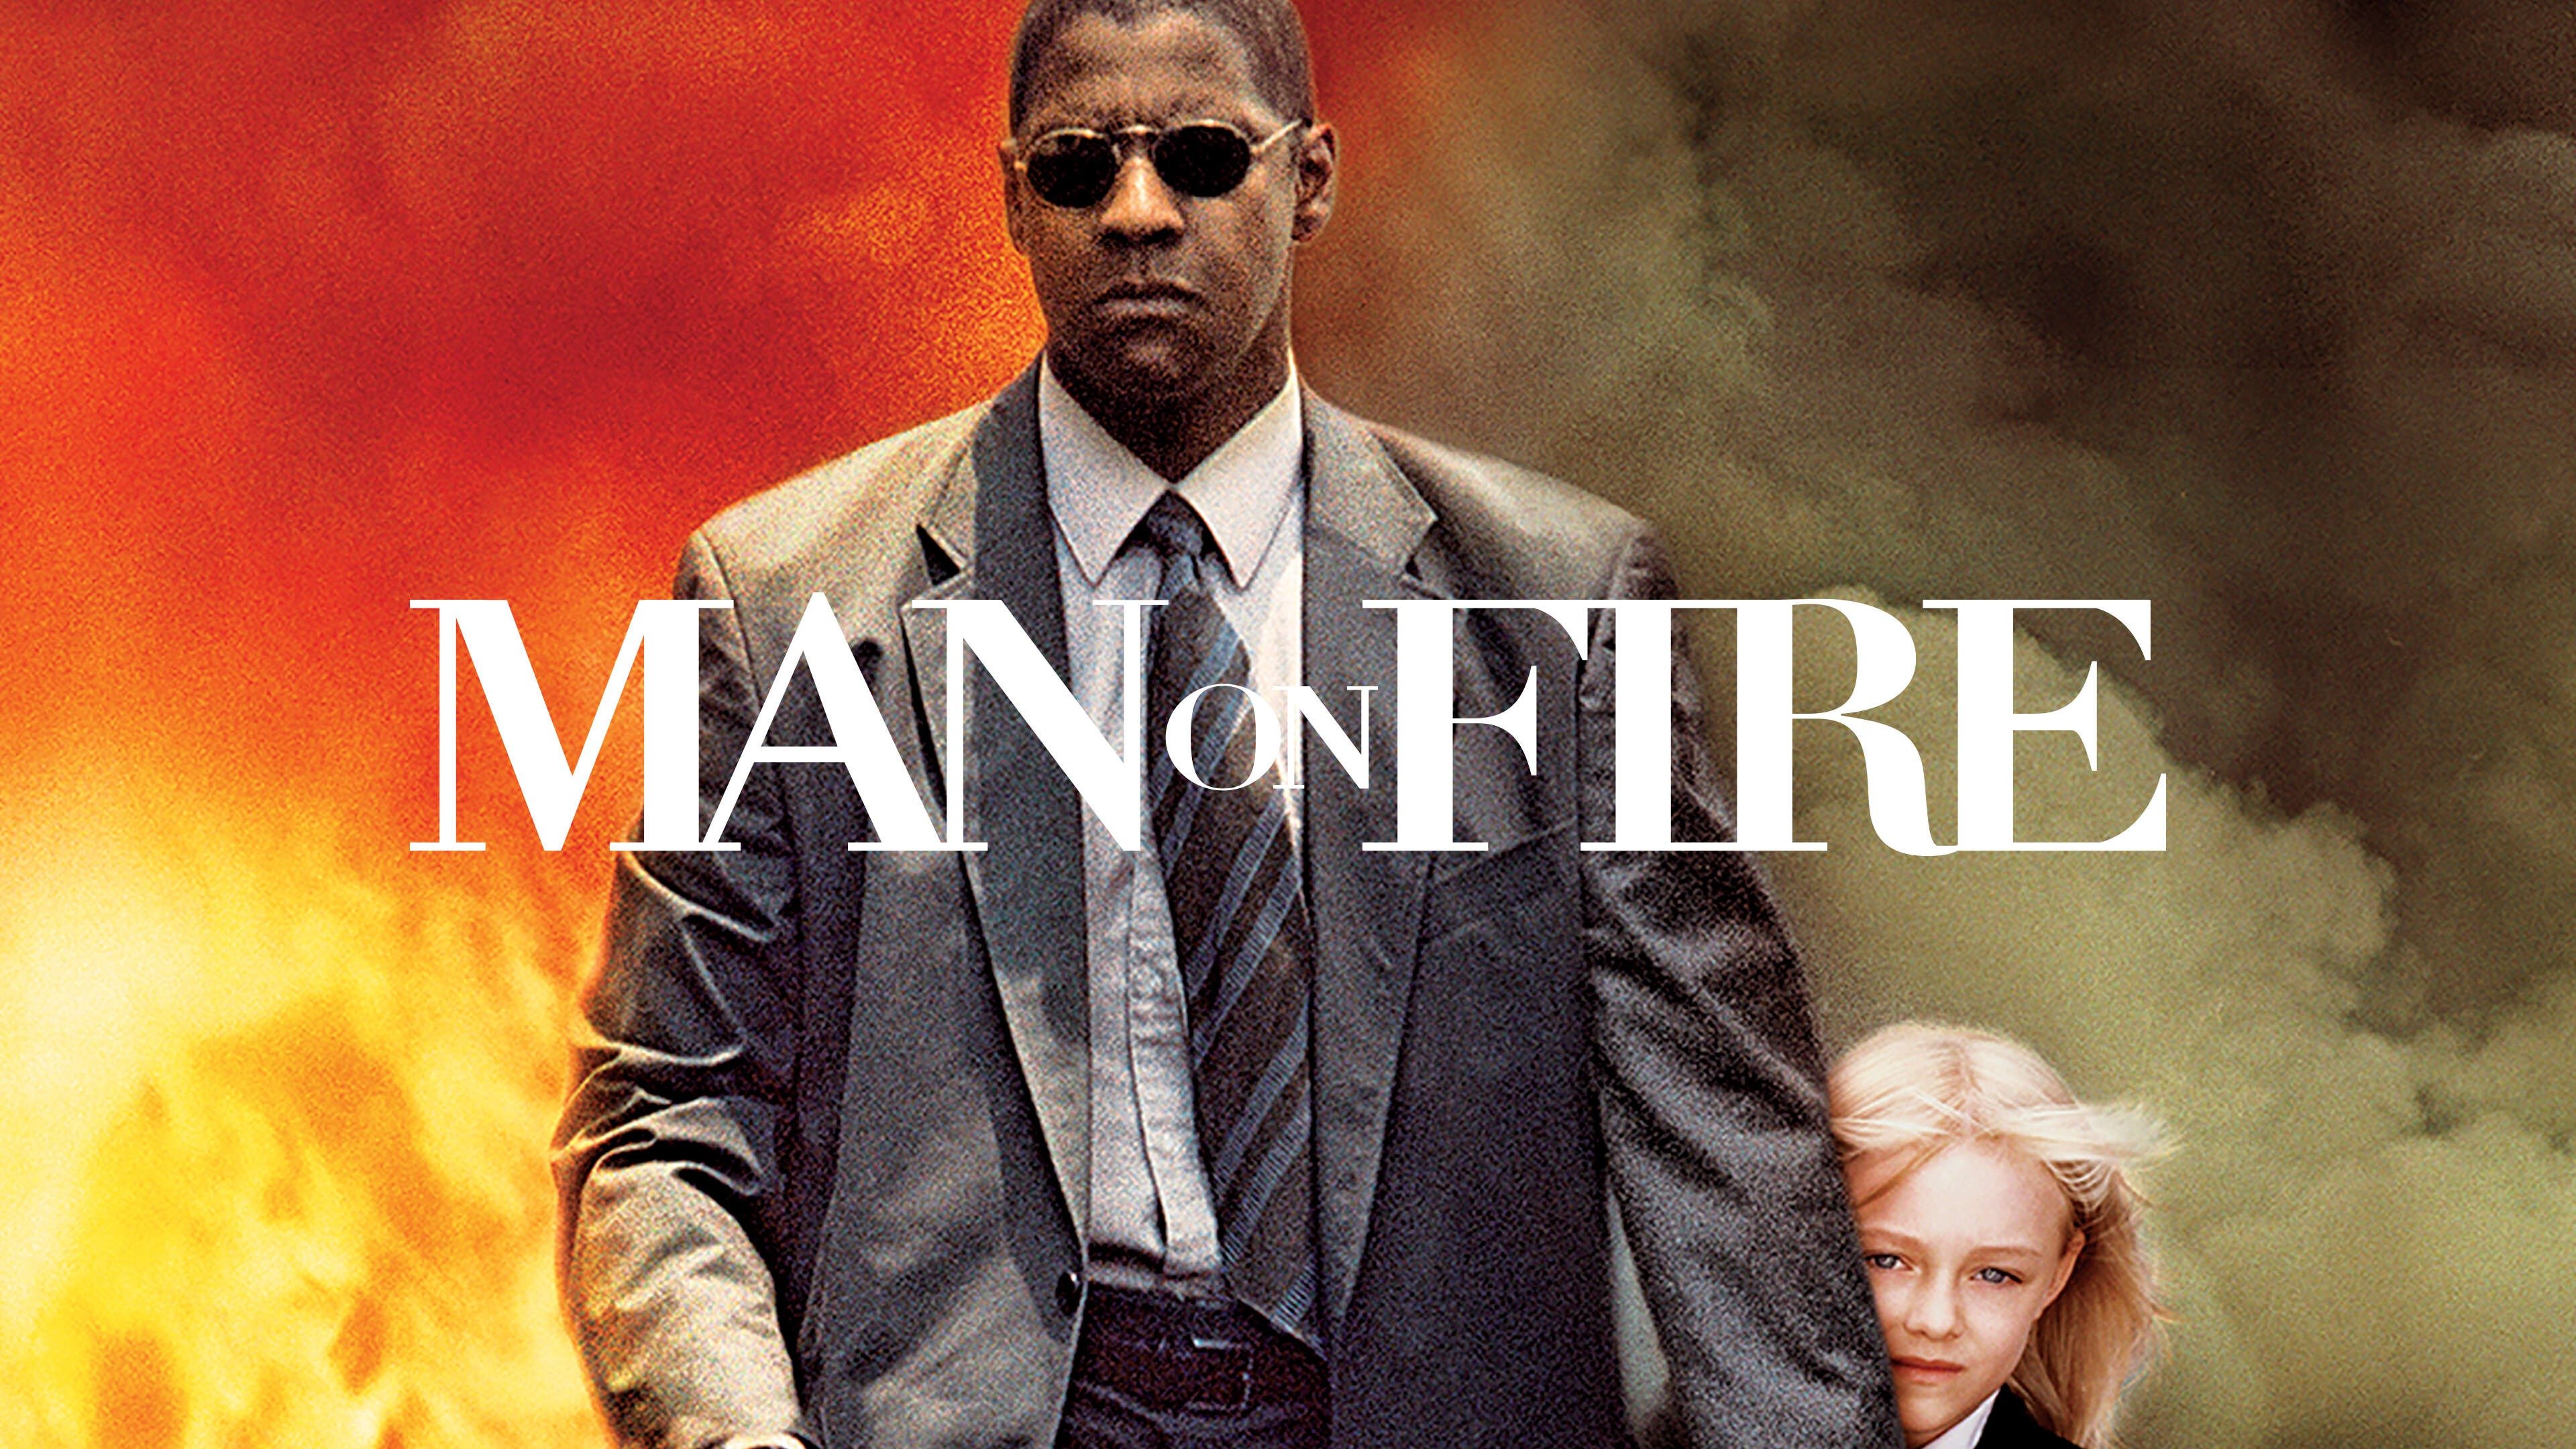 Man on Fire Trailer 1 Trailers & Videos Rotten Tomatoes